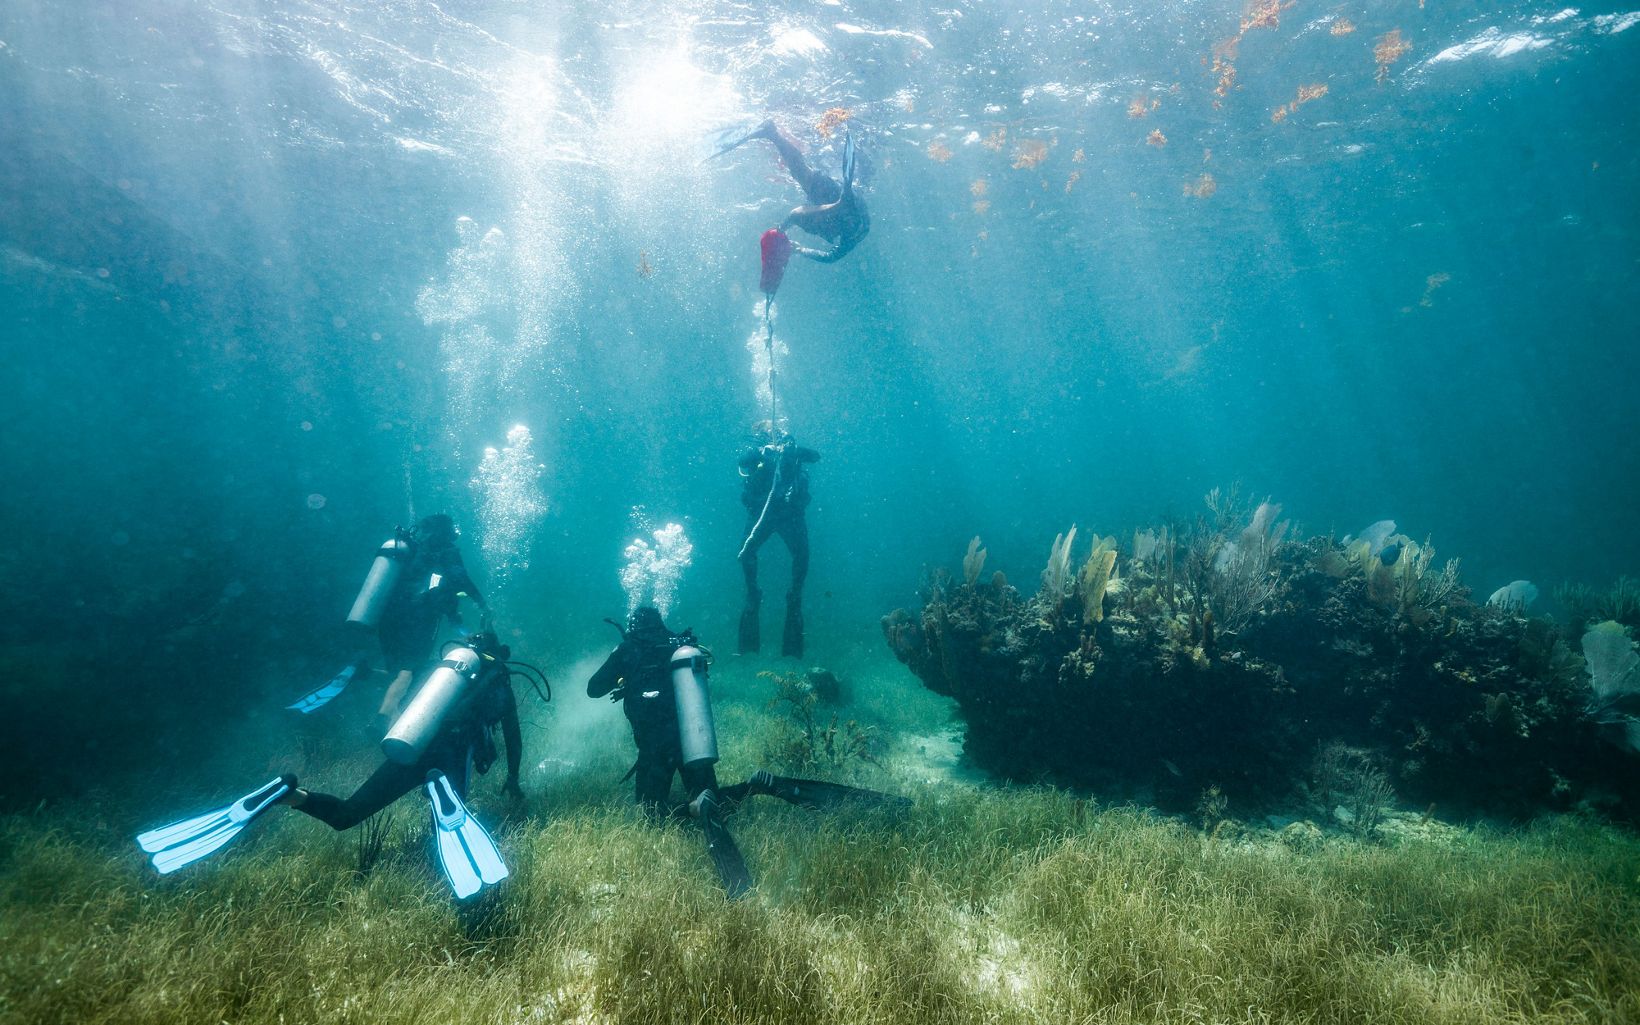 Five divers practice inflating a lift bag underwater near Puerto Morelos, Mexico.